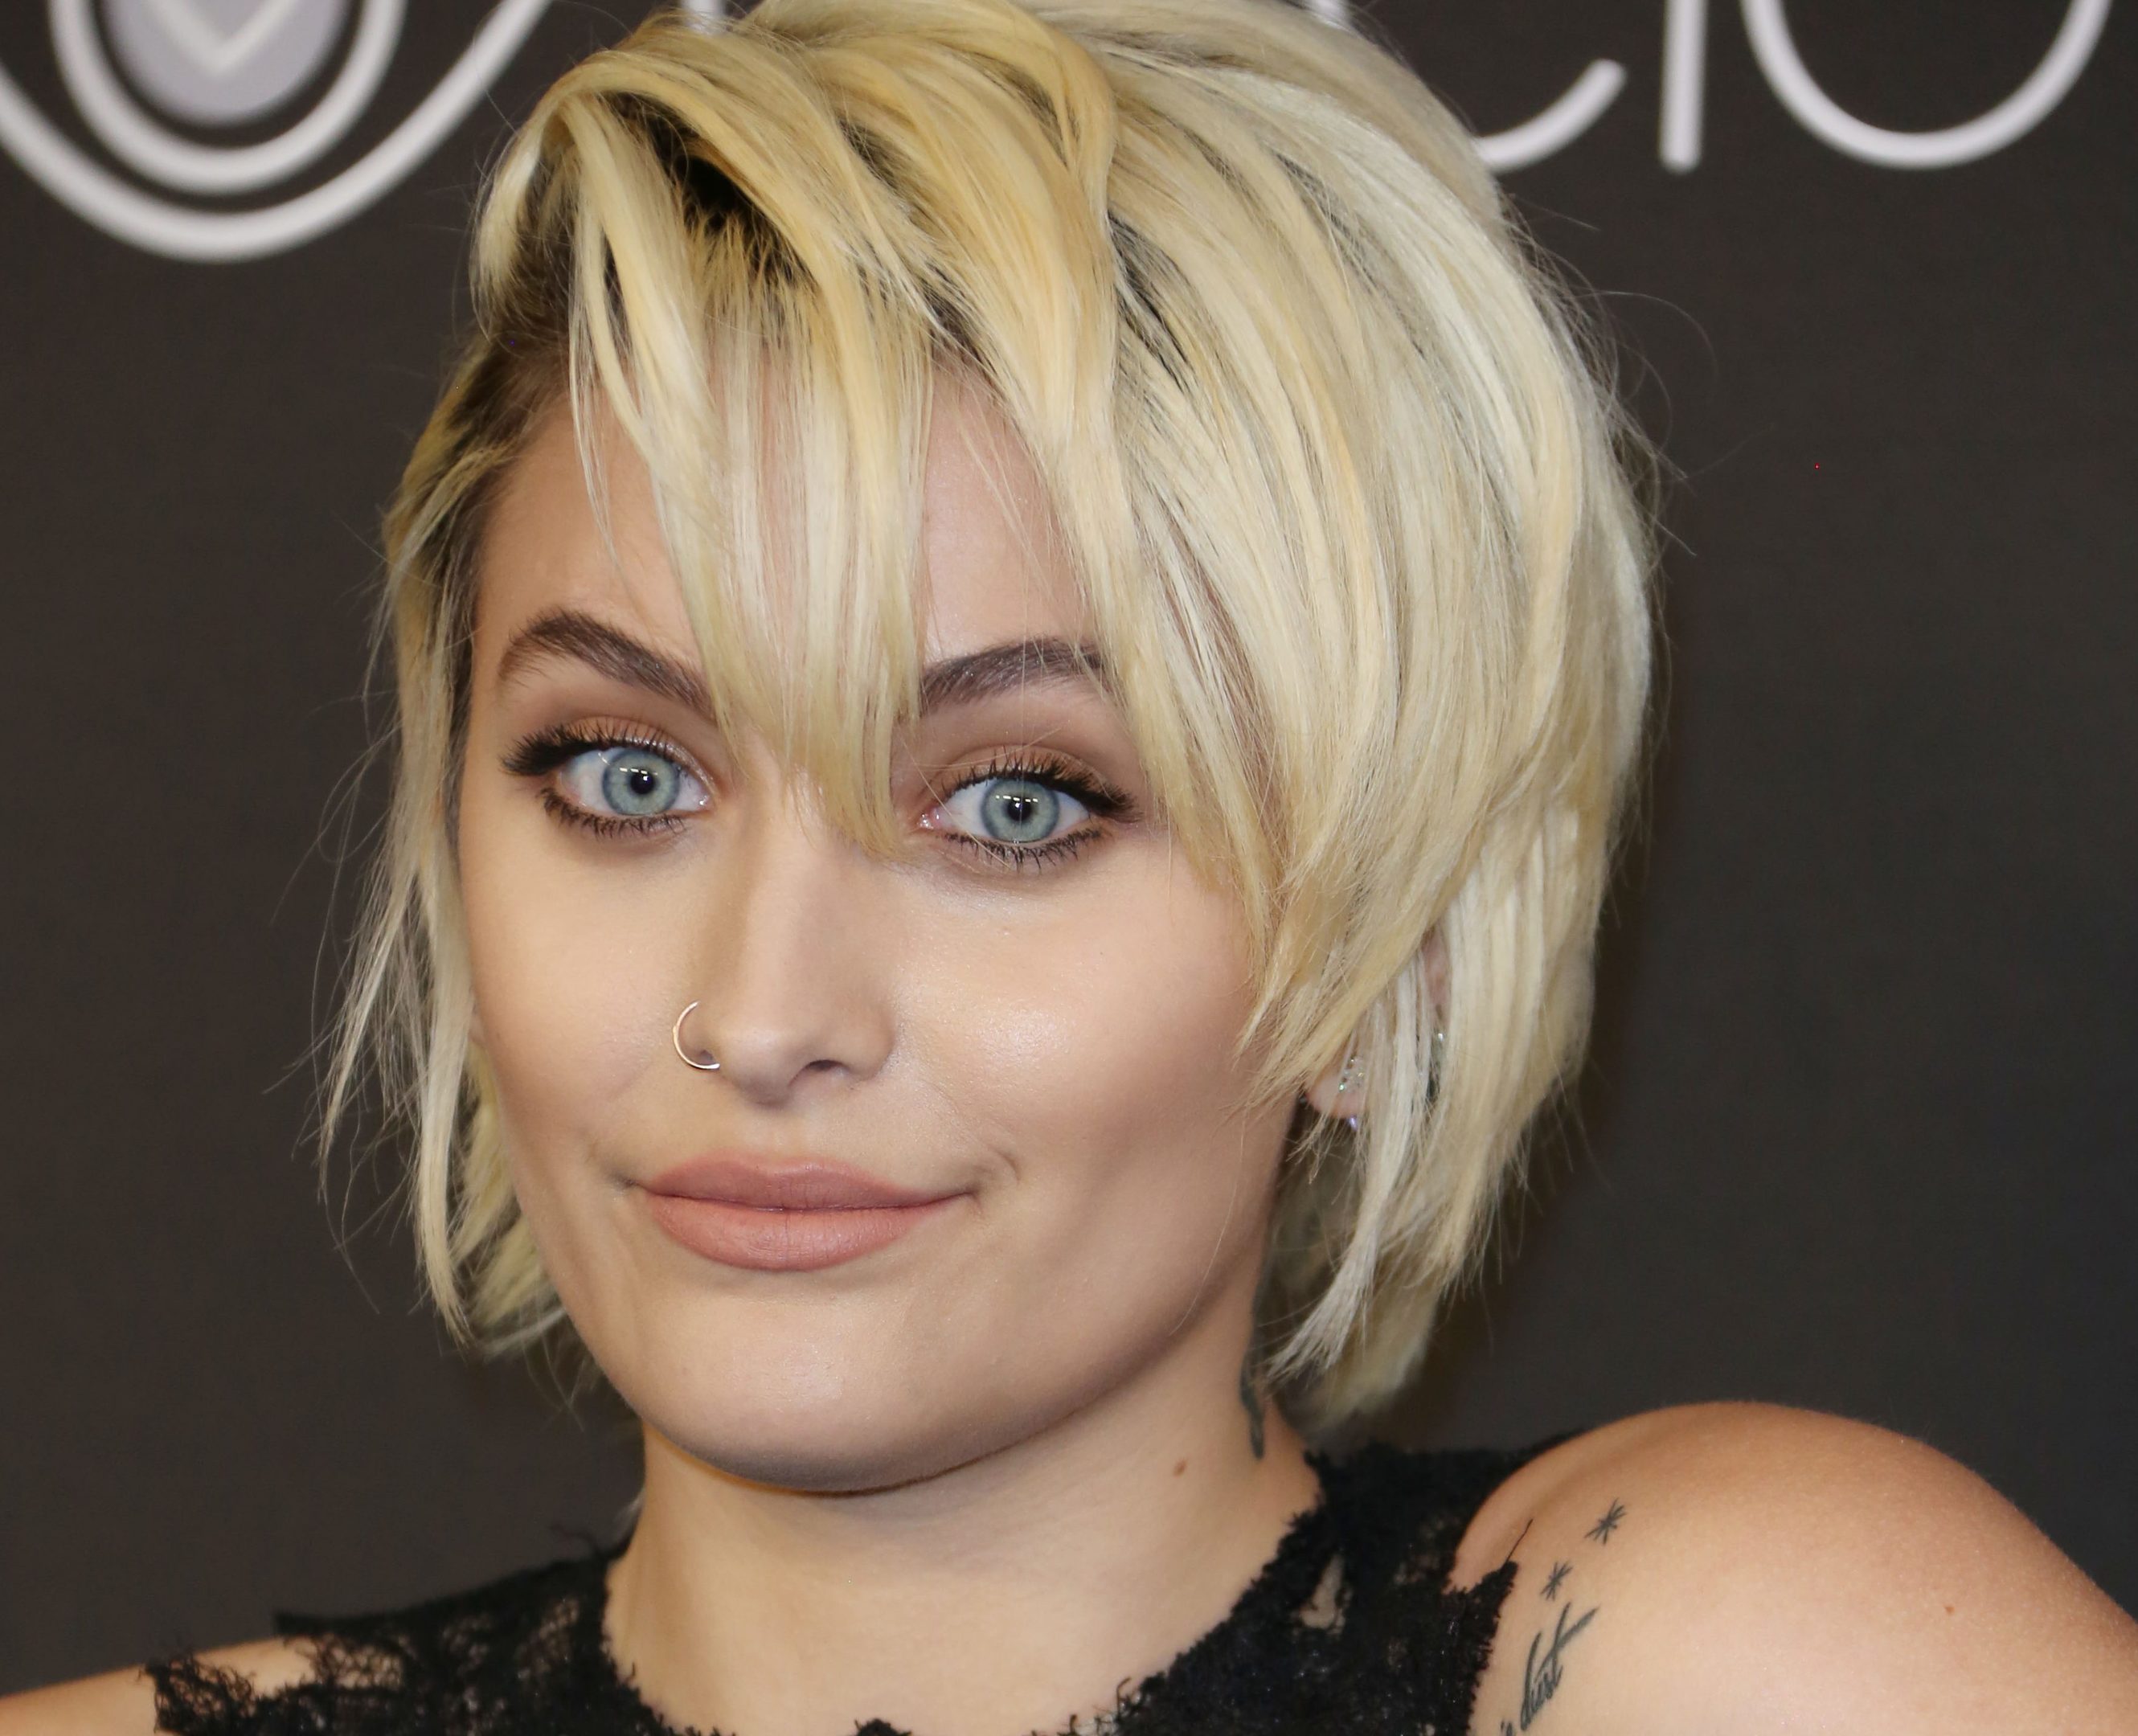 Paris Jackson objected to the portrayal of her father and godmother